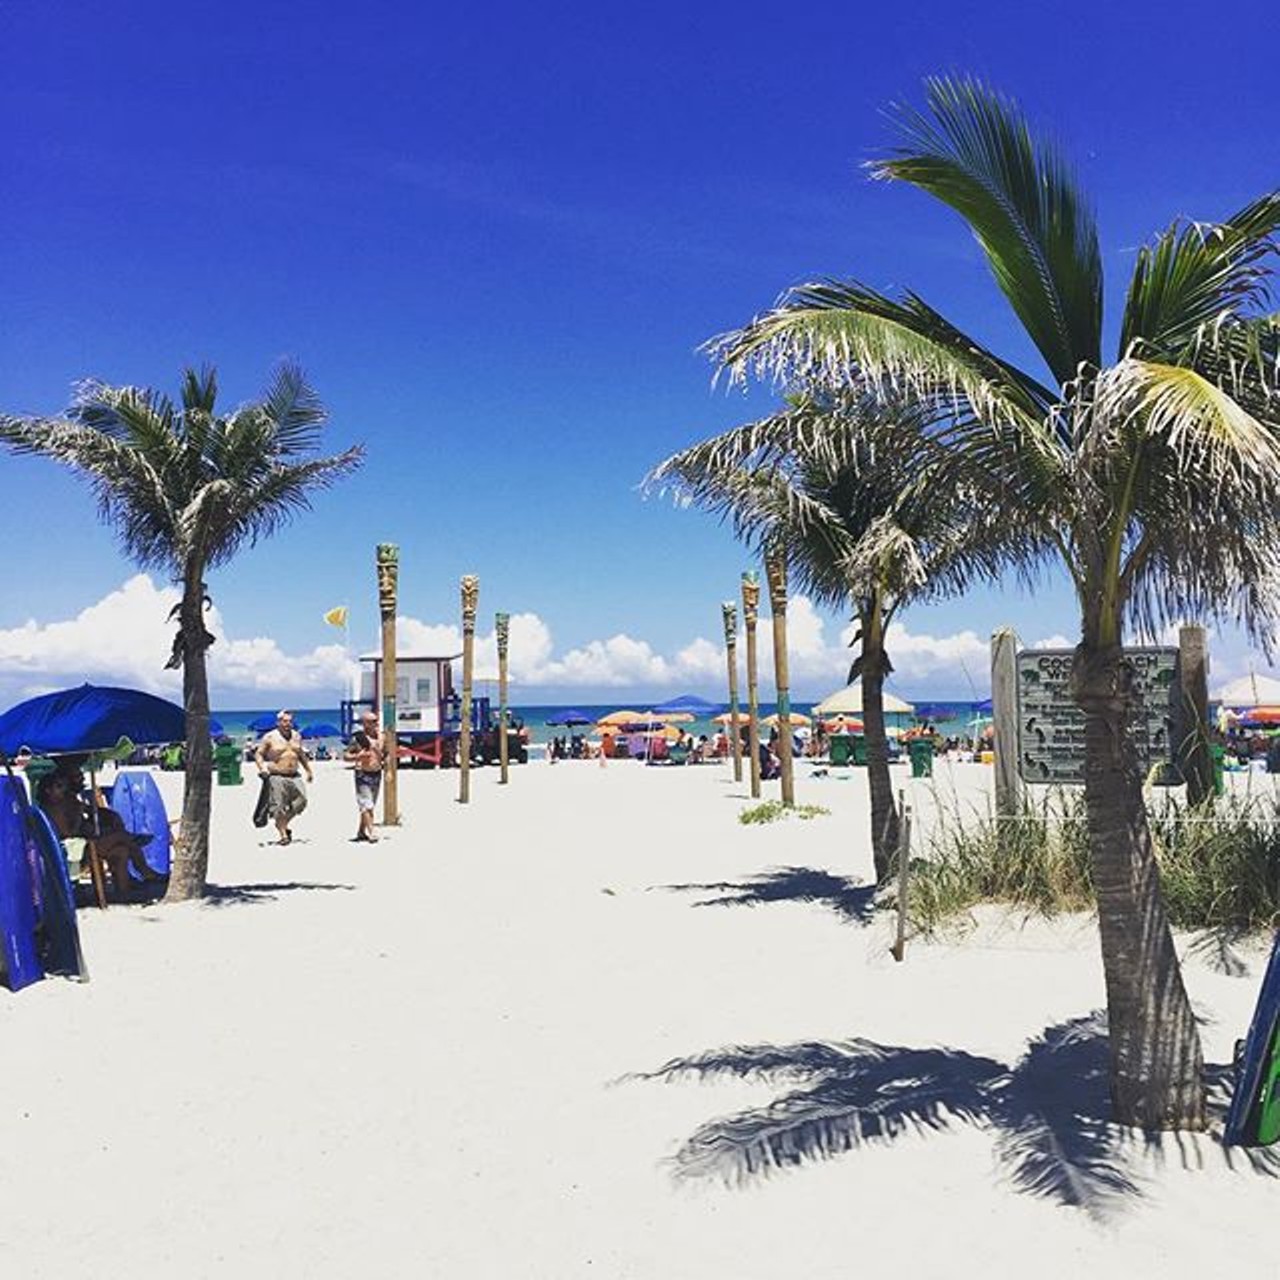 Make it a boozie beach day at Cocoa Beach
Cocoa is one of the closest beaches to Orlando, take advantage of it by grabbing a six pack with your friends and relaxing on the sand. Be a good neighbor and don&#146;t leave any trash on the beach, though.
Photo via fromthebeach2themountains/Instagram